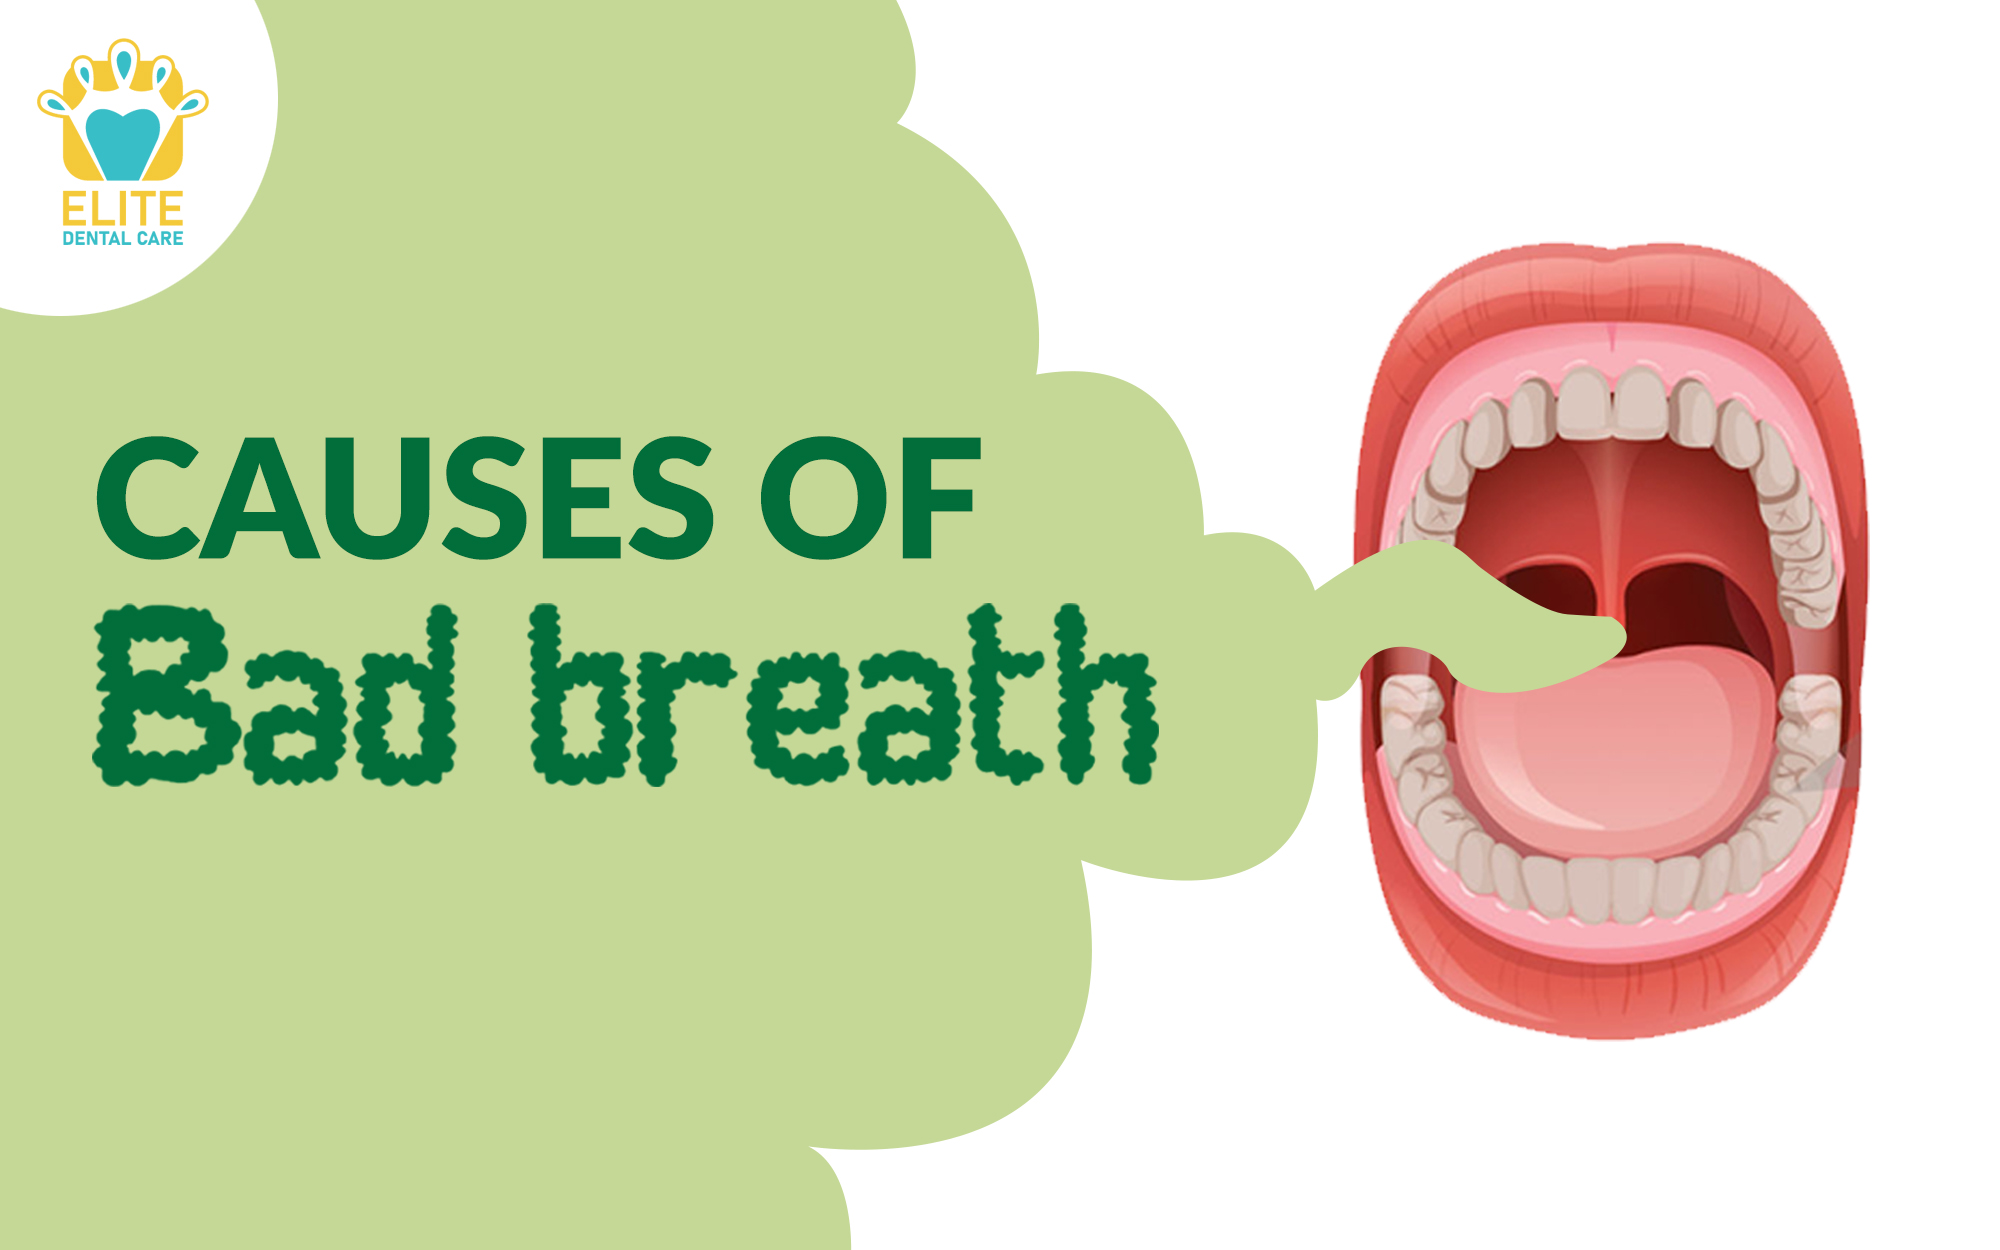 how to freshen breath without toothbrush clipart